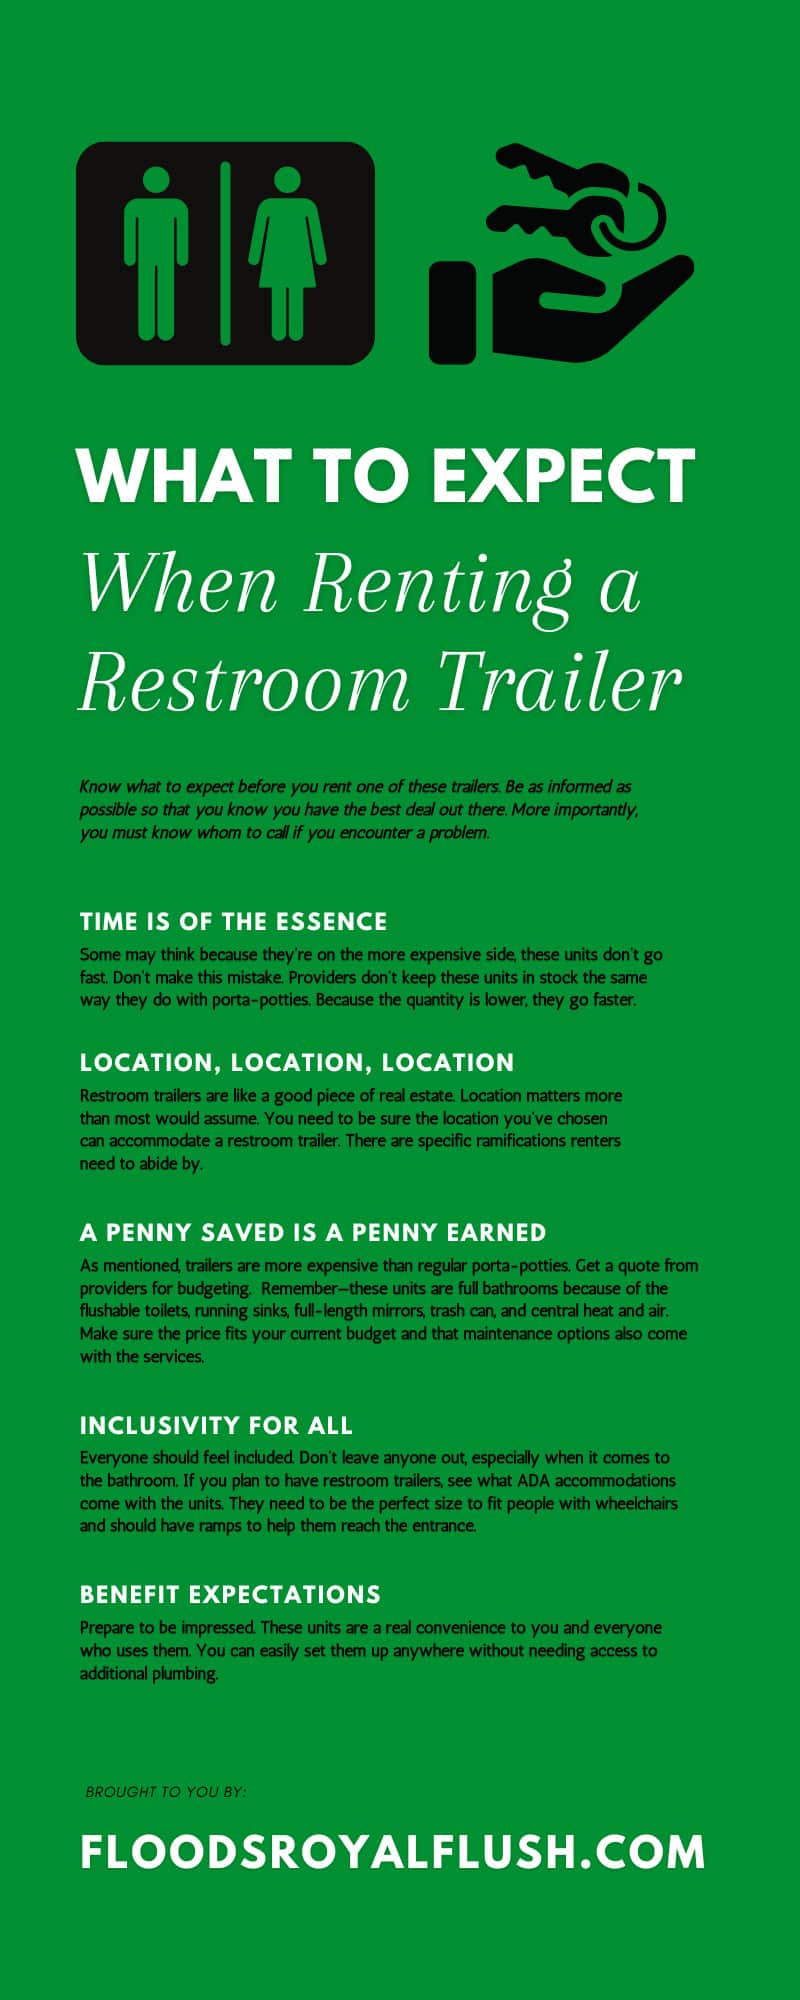 What To Expect When Renting a Restroom Trailer